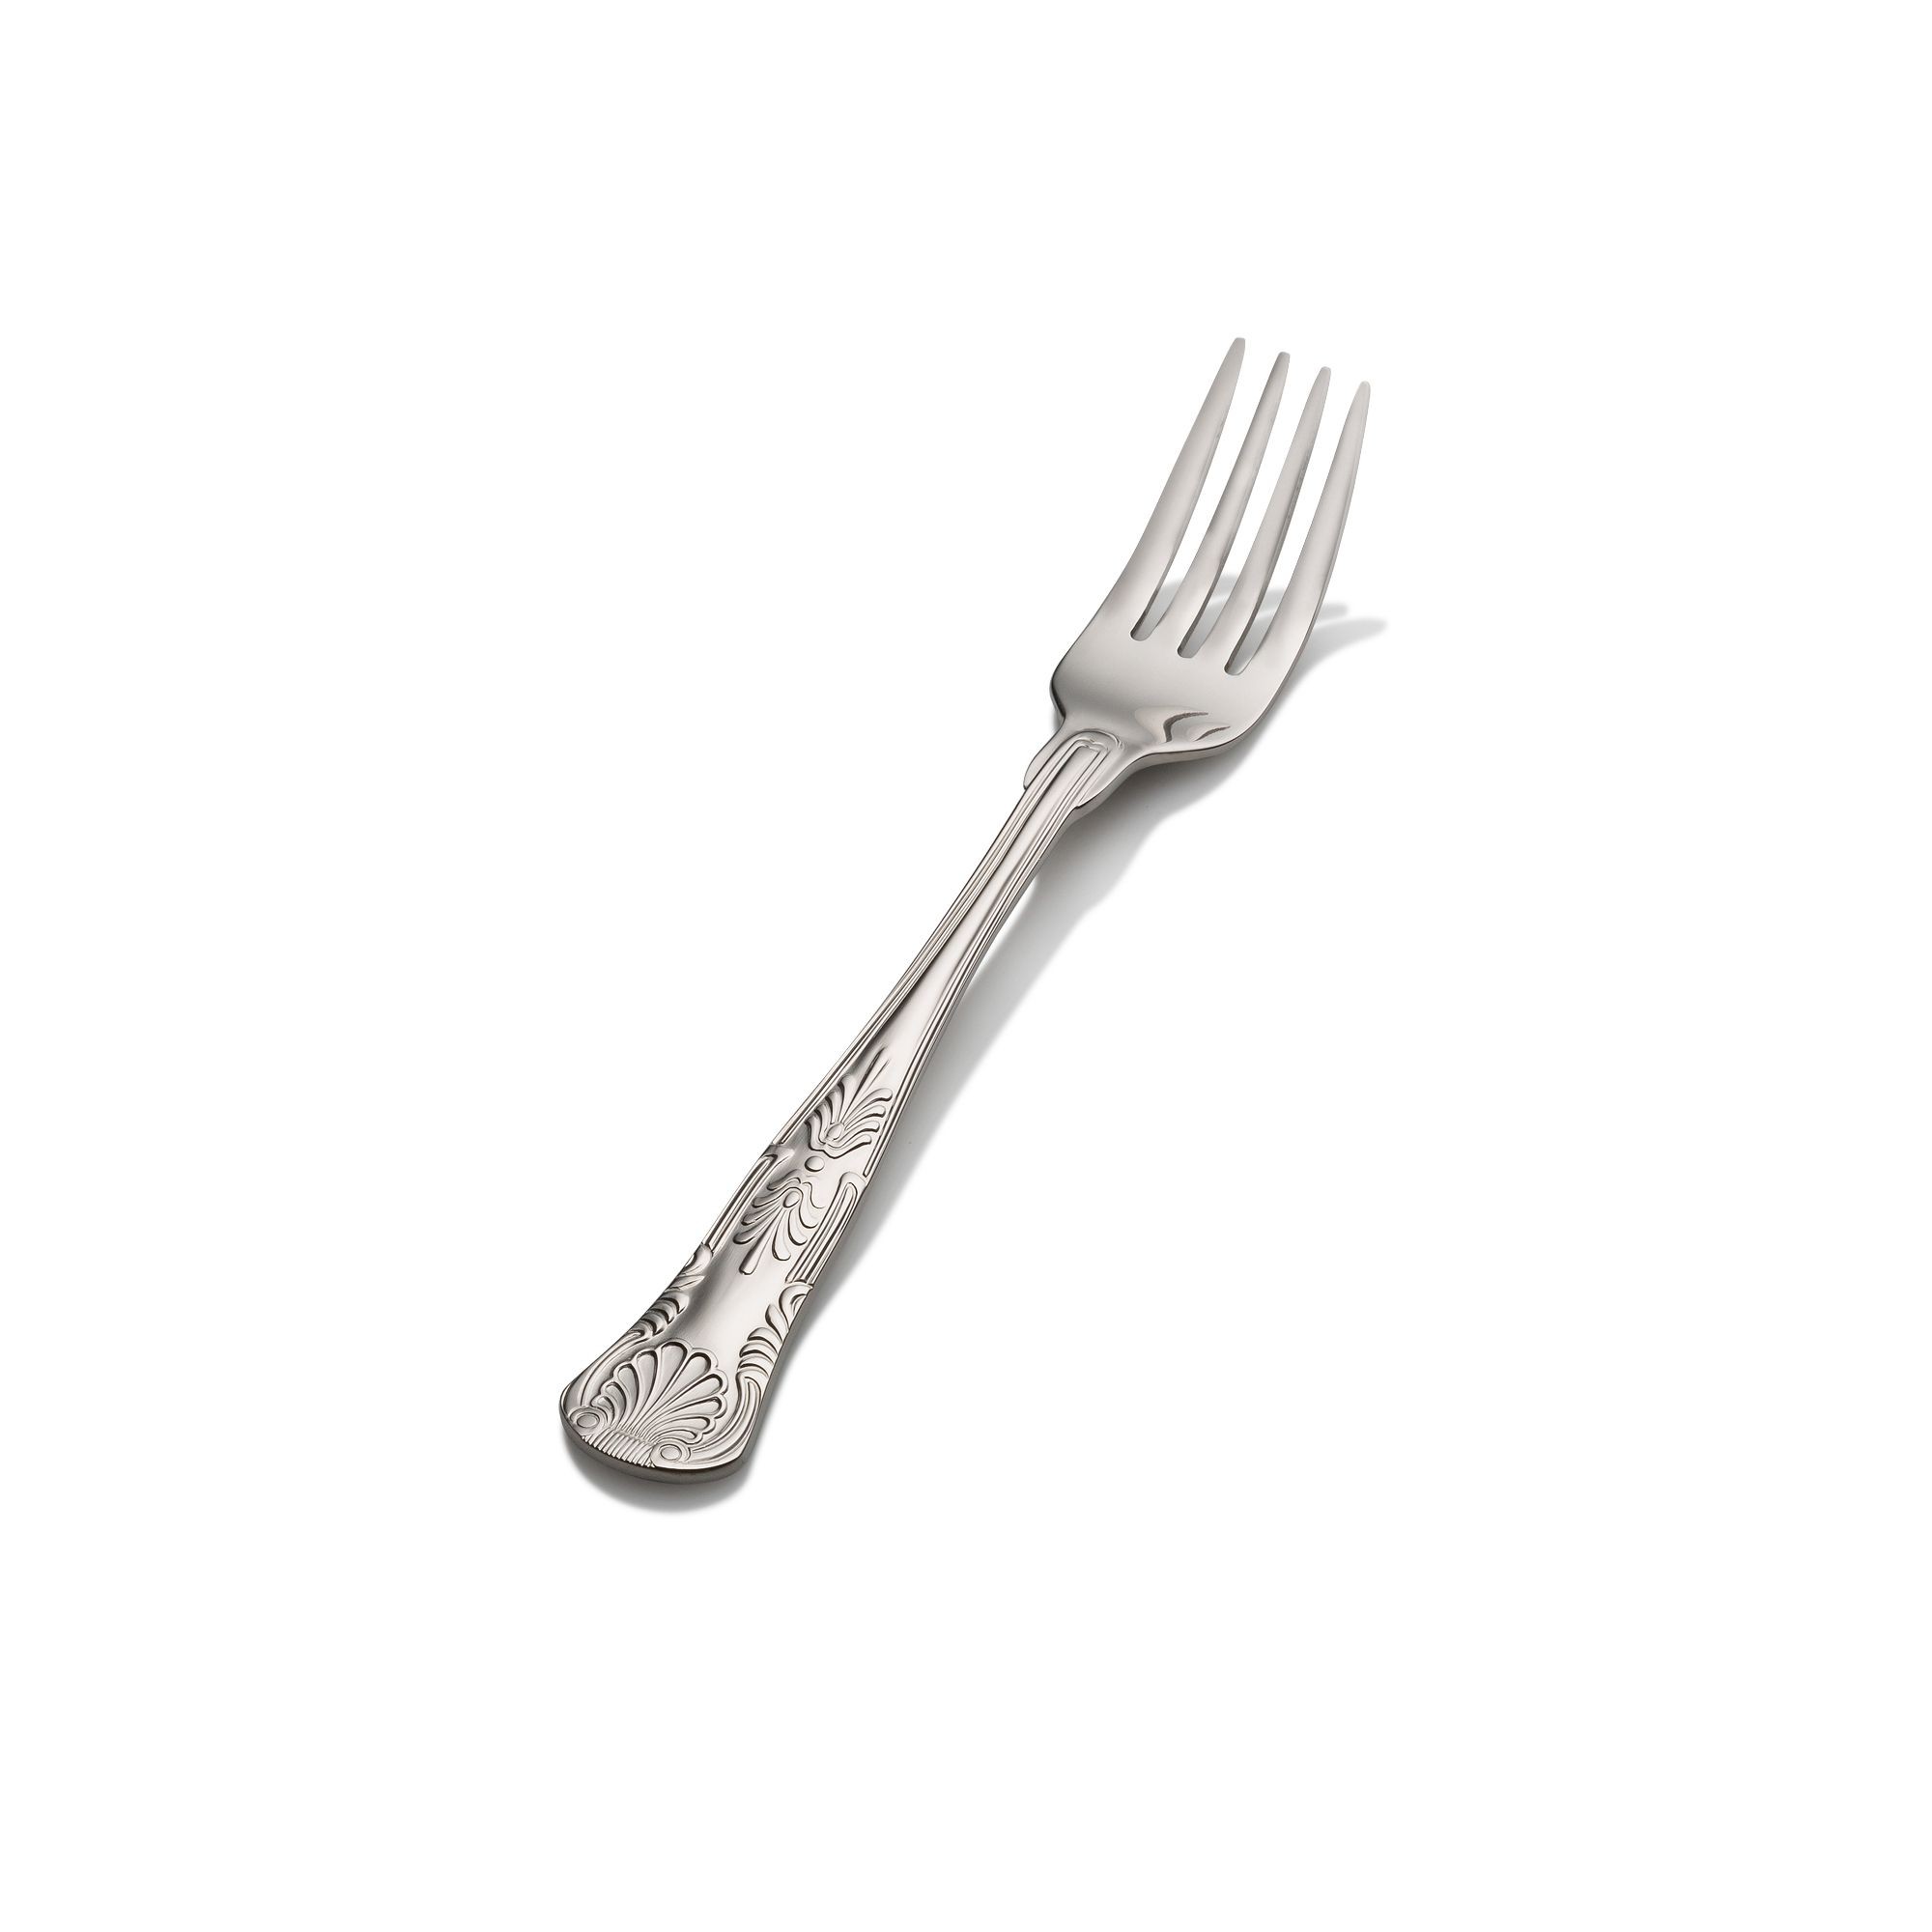 Bon Chef S2707 Kings 18/8 Stainless Steel Salad and Dessert Fork